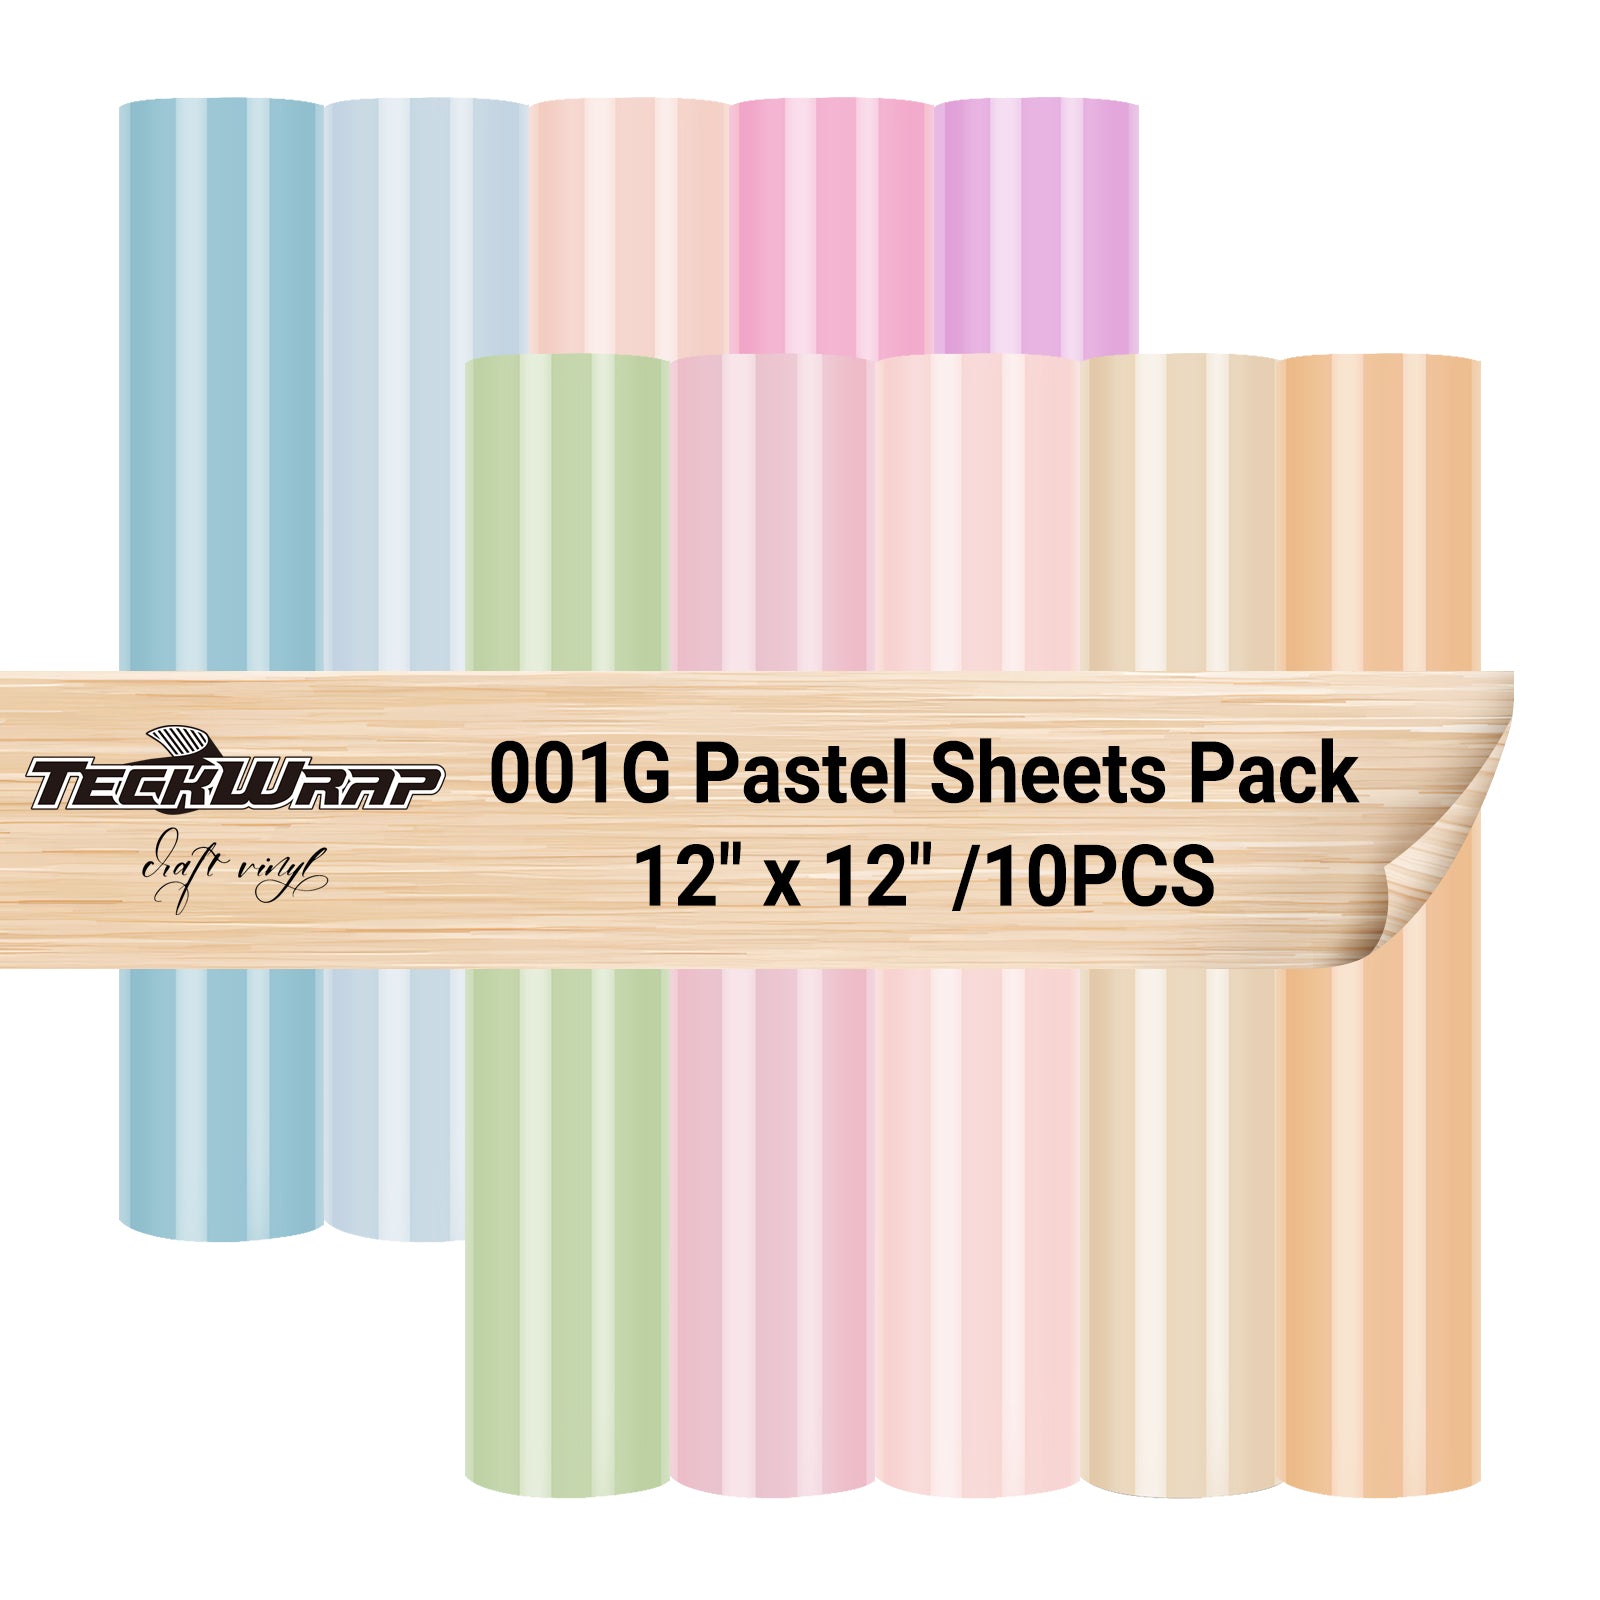 001 Series Pastel Color Sheets Pack